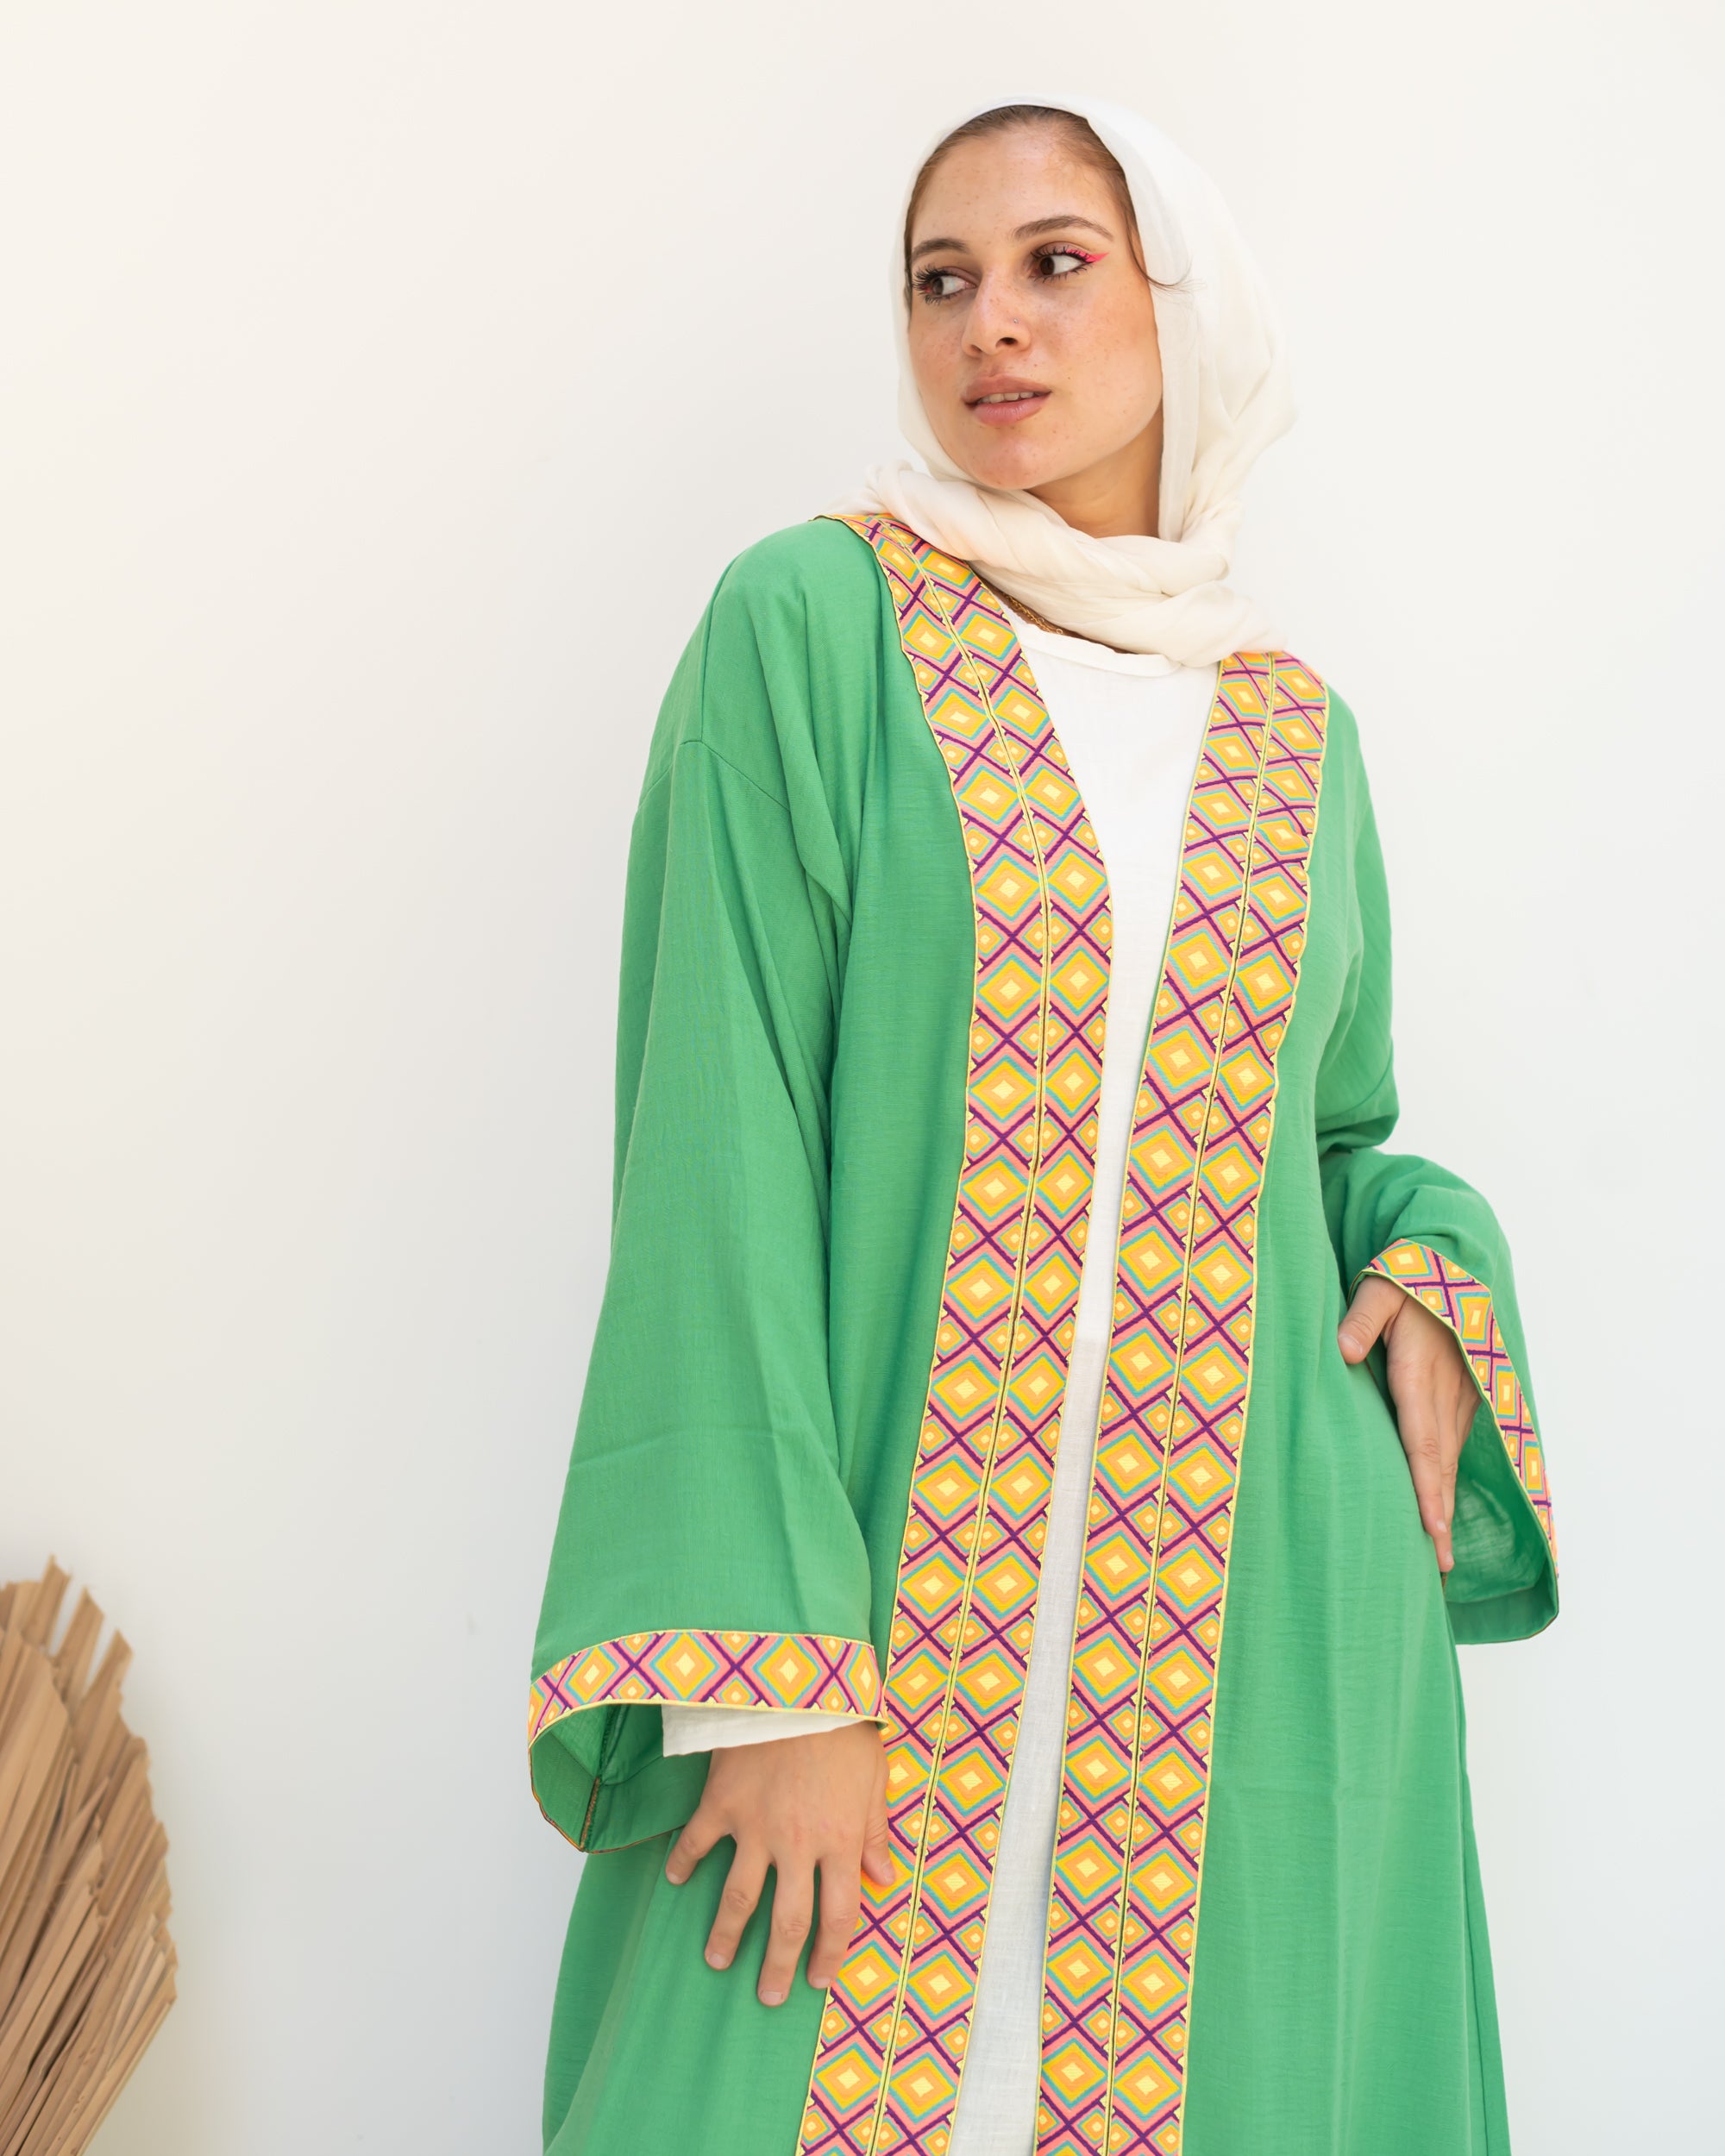 Green cloak with zigzag tape